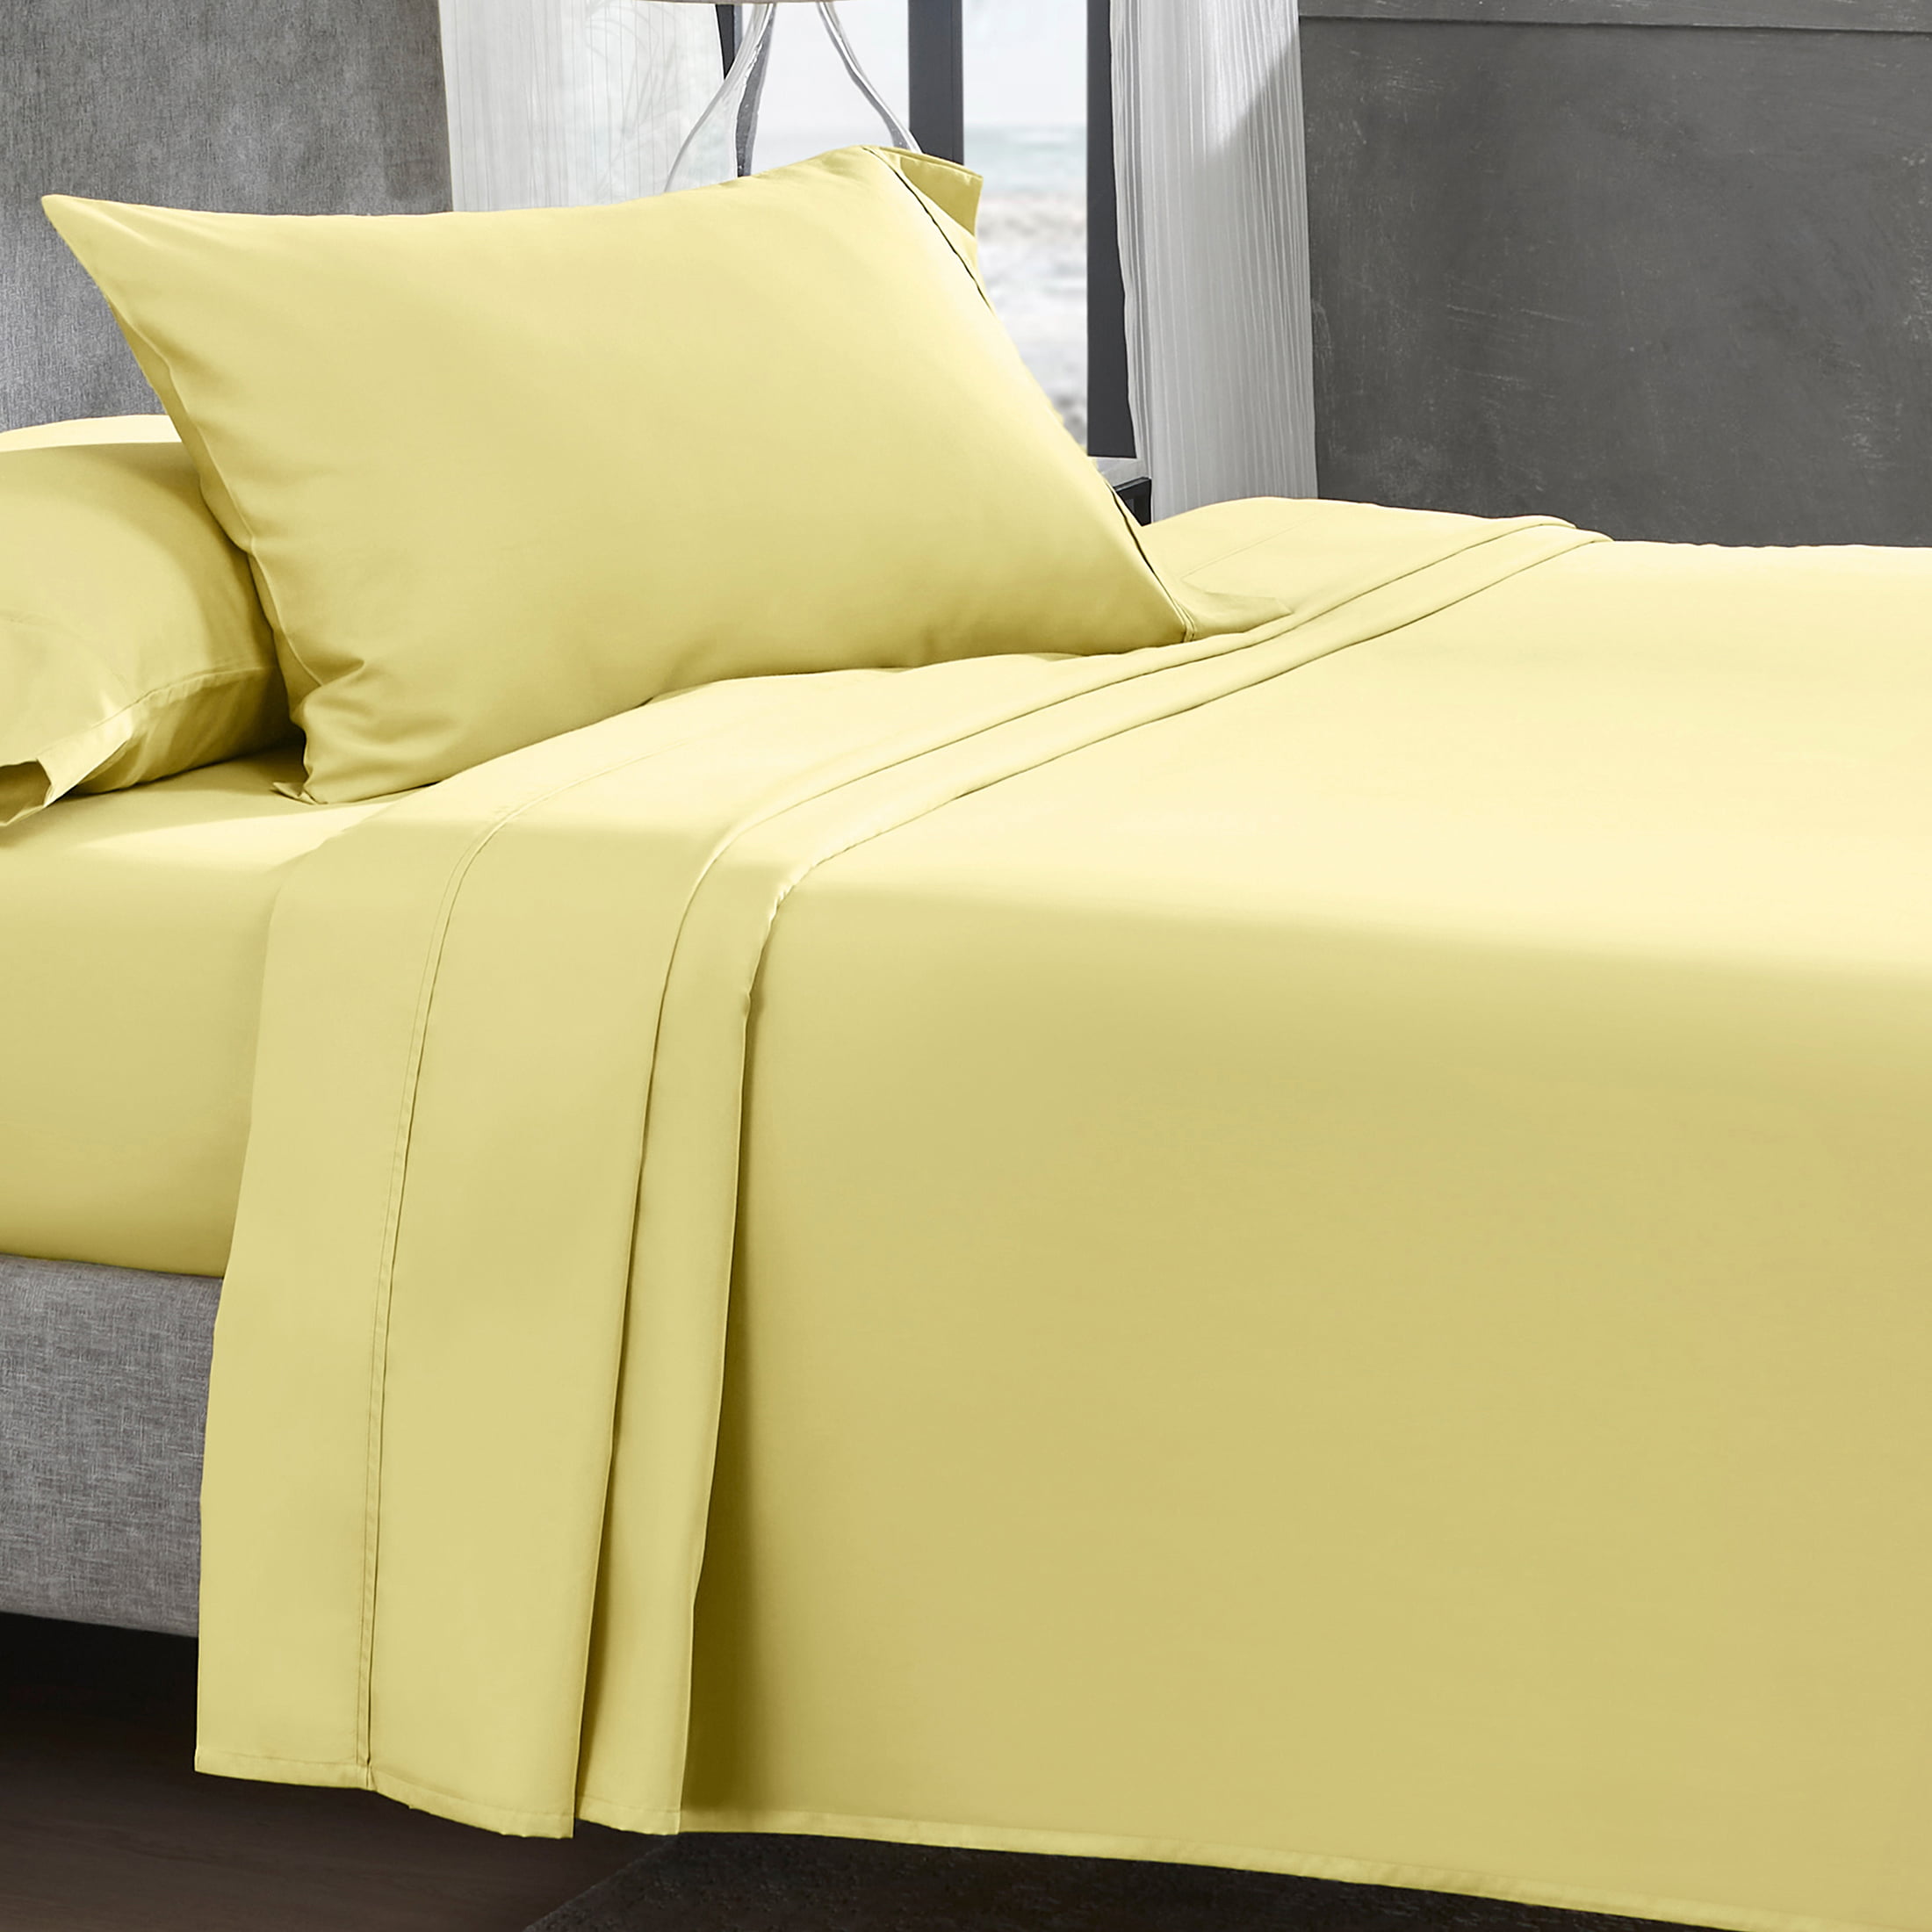 Soft and Breathable 100% Natural Cotton Details about   6 Piece Bed Sheet Set Long Staple Com 